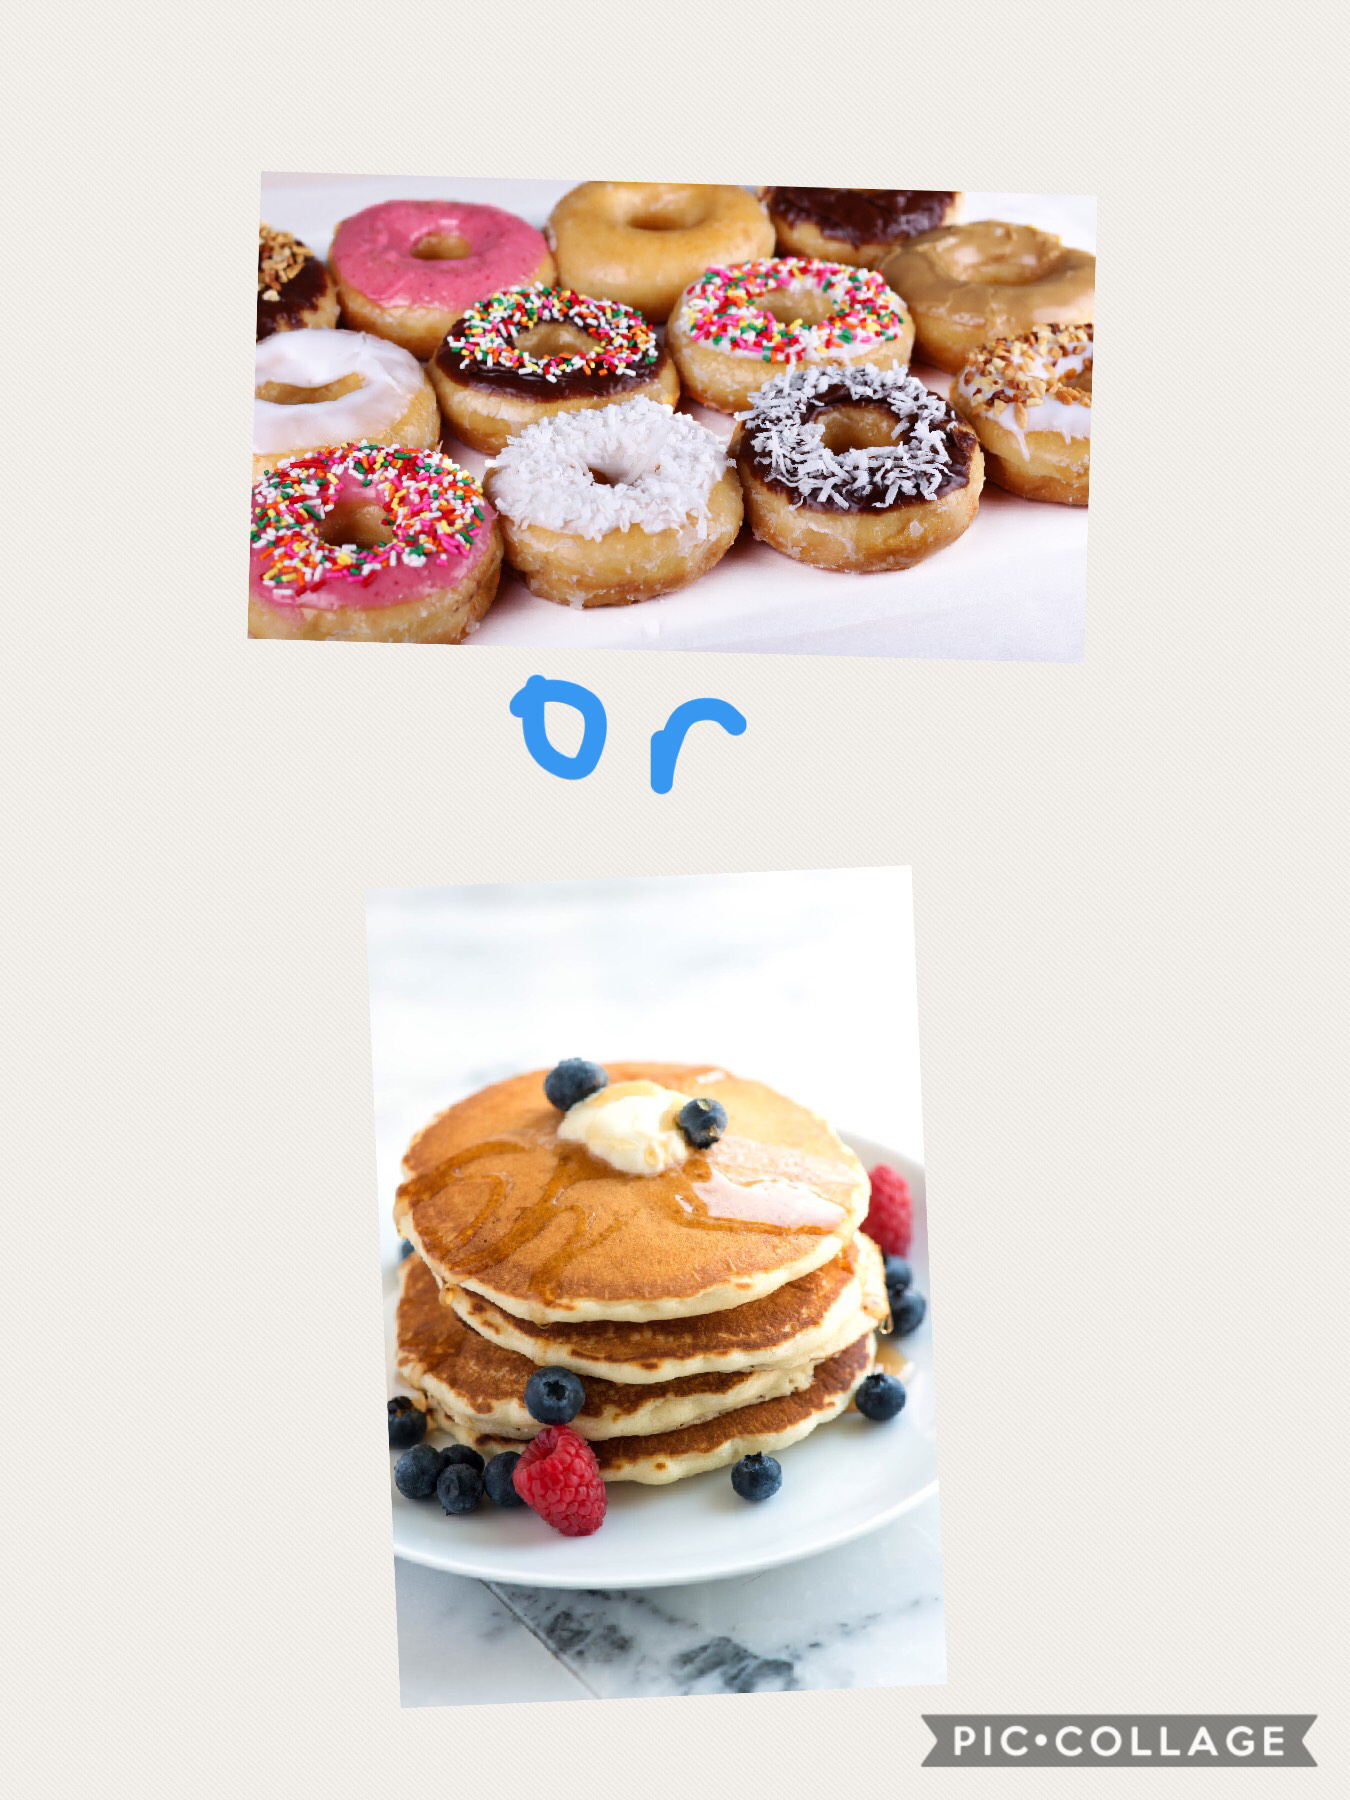 Donuts or pancakes